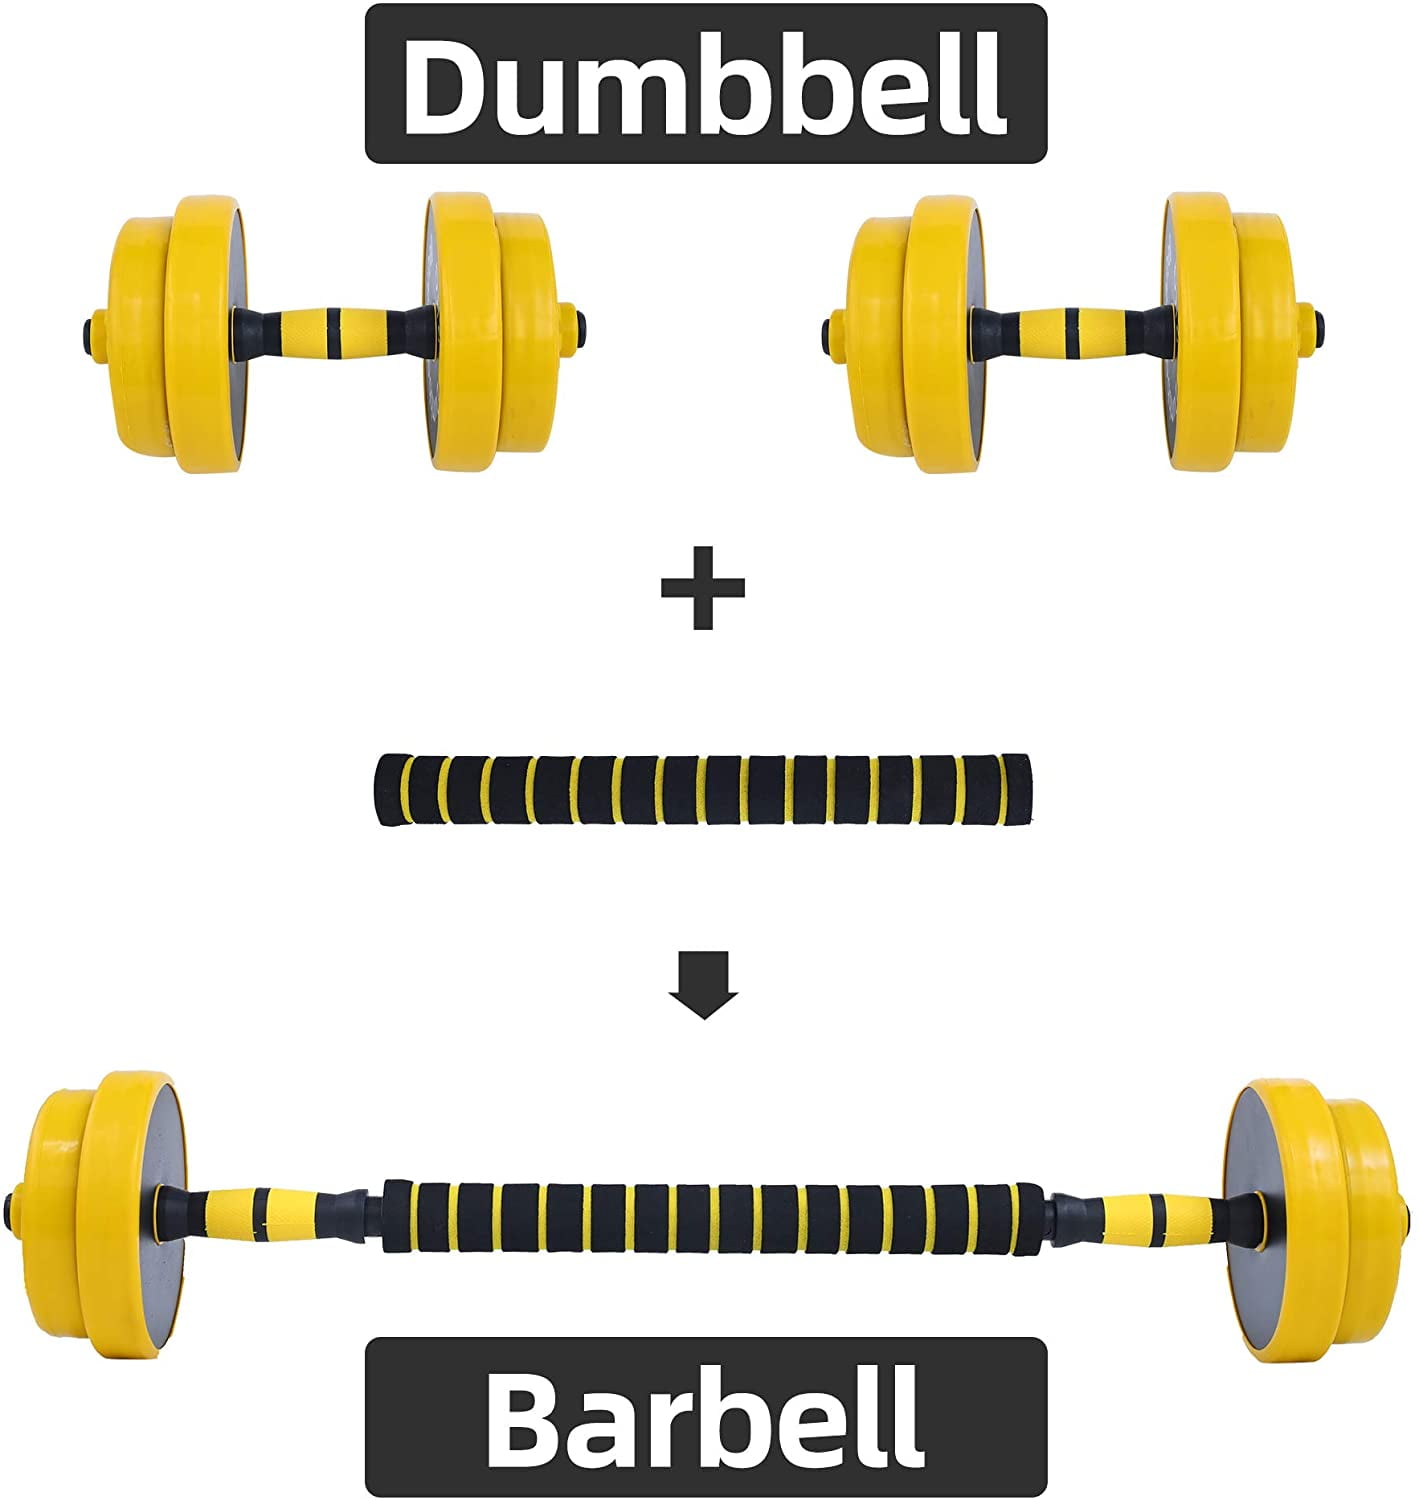 Suitable for Home or Gym Exercise YIZHIHUA Dumbbell Set,Two-in-One 20/30kg Adjustable Dumbbells-Barbell Weights Set for Men and Women